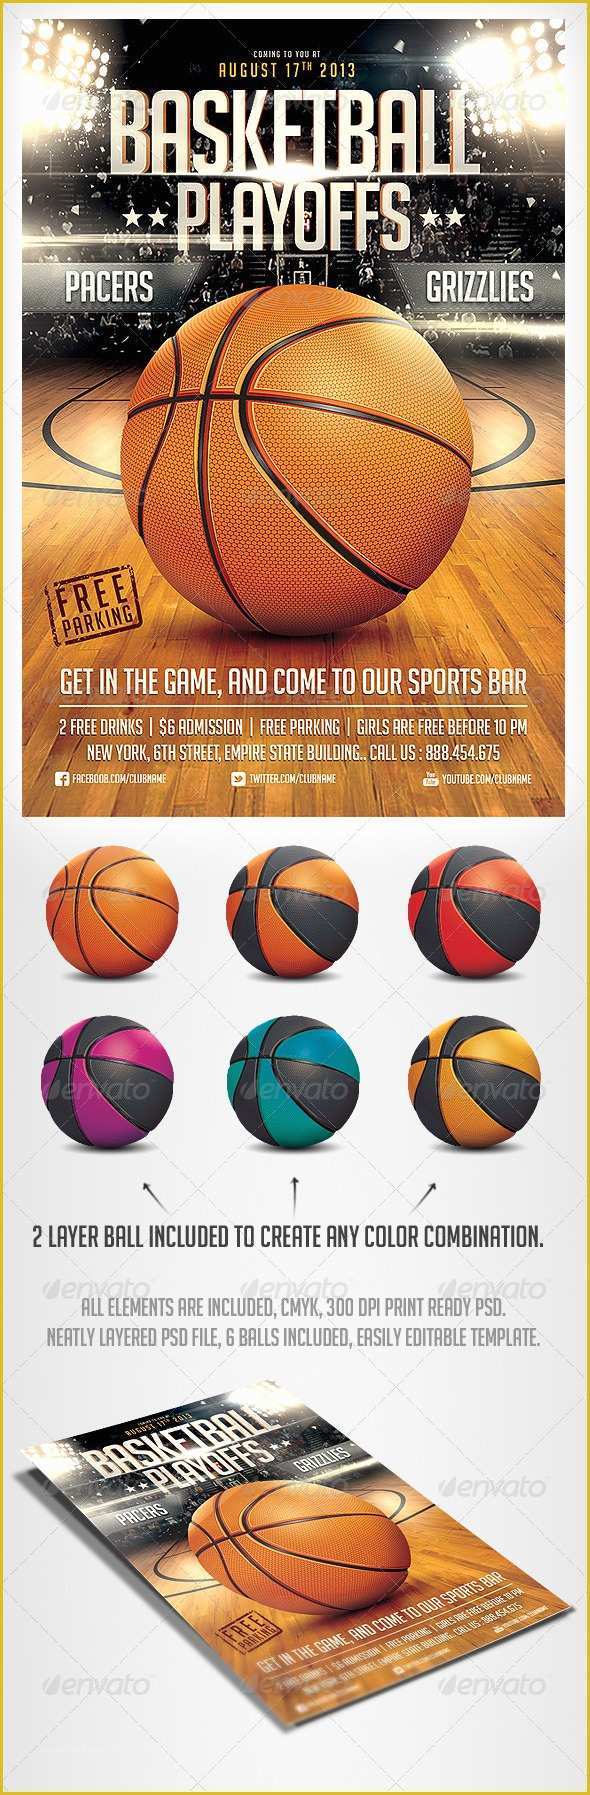 Free Basketball Photoshop Templates Of Basketball Game Flyer Template